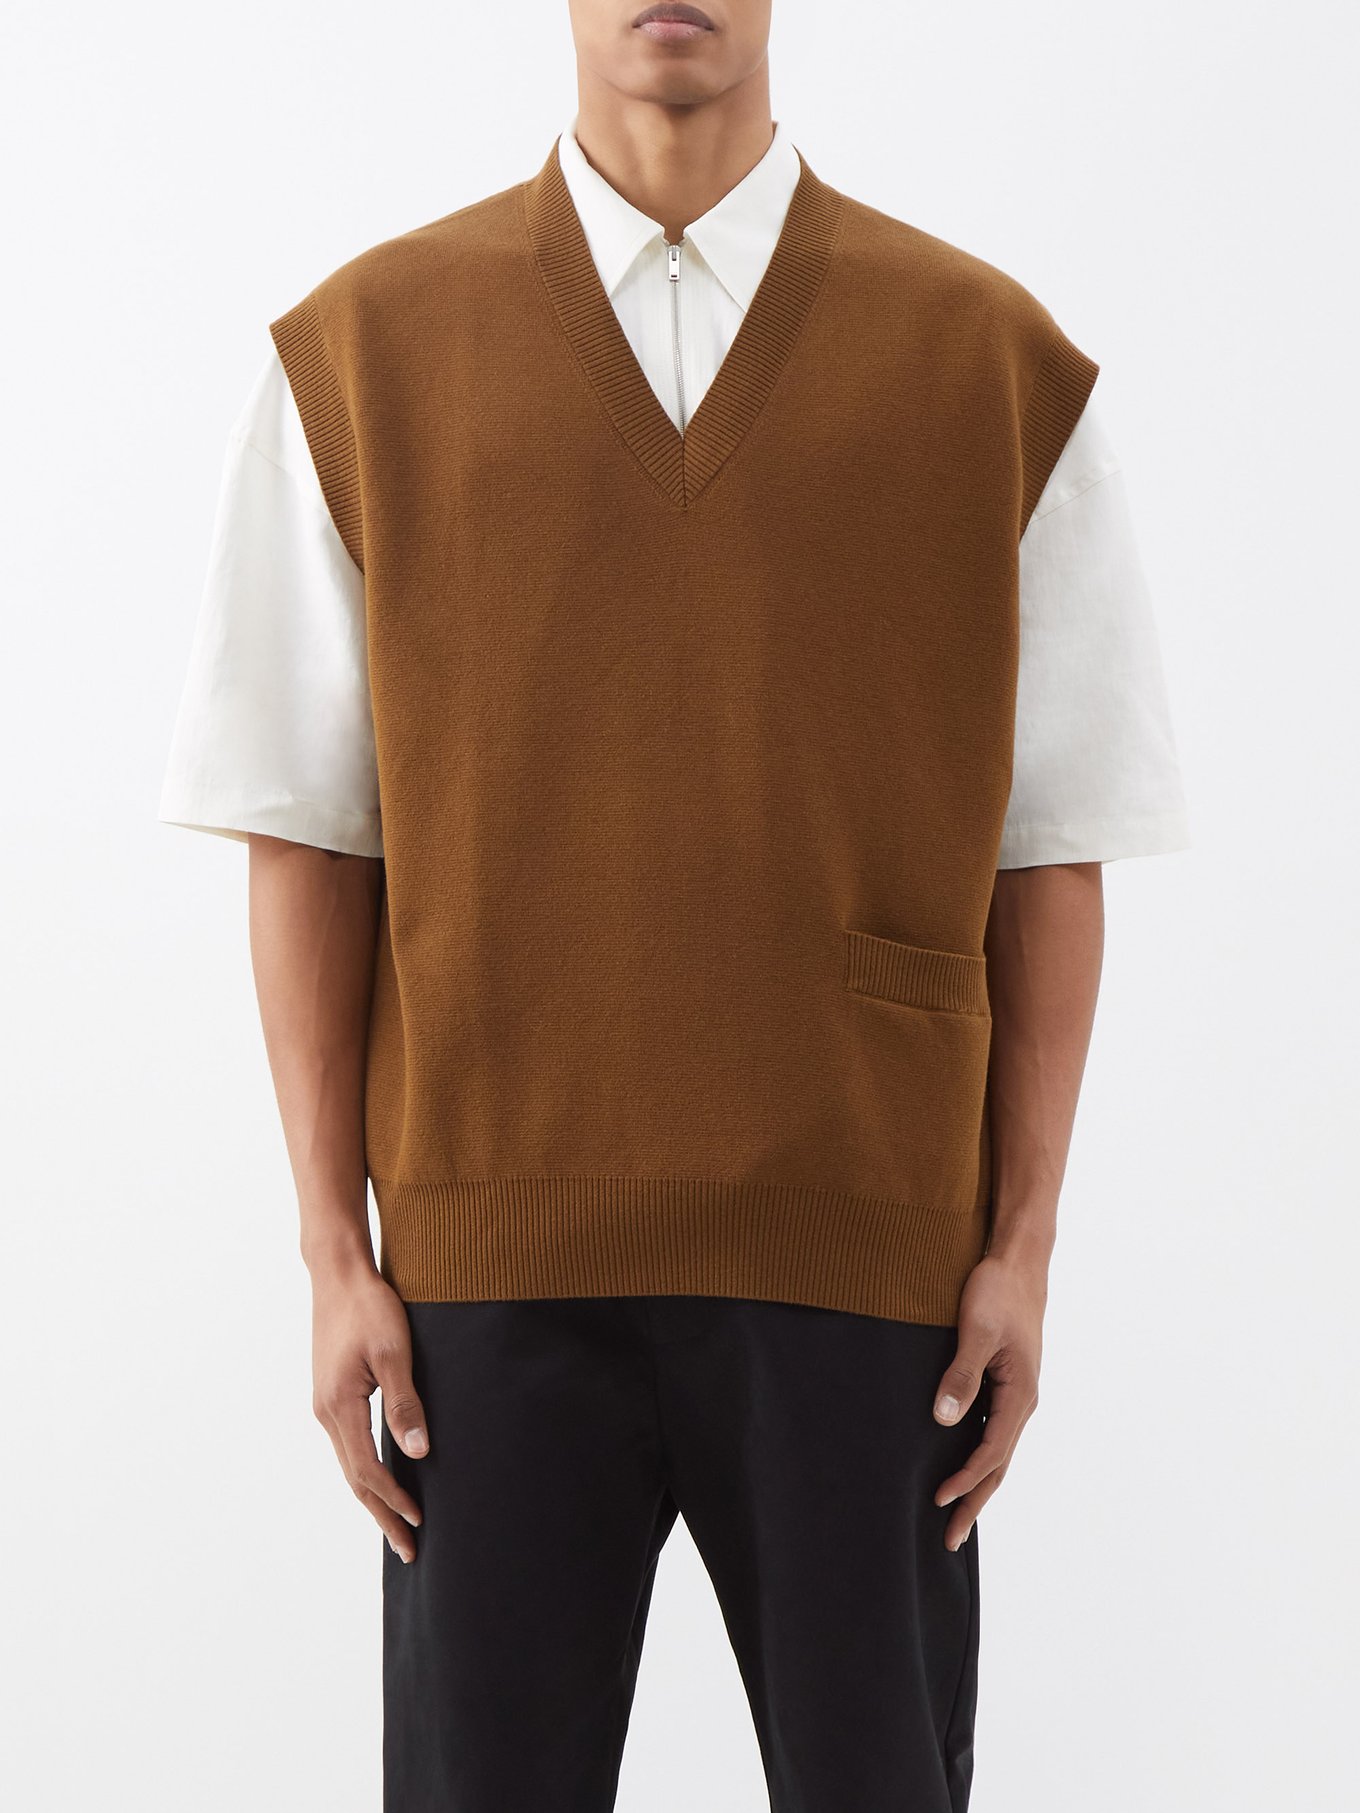 Brown Foss oversized wool and cotton-blend sweater vest | Studio